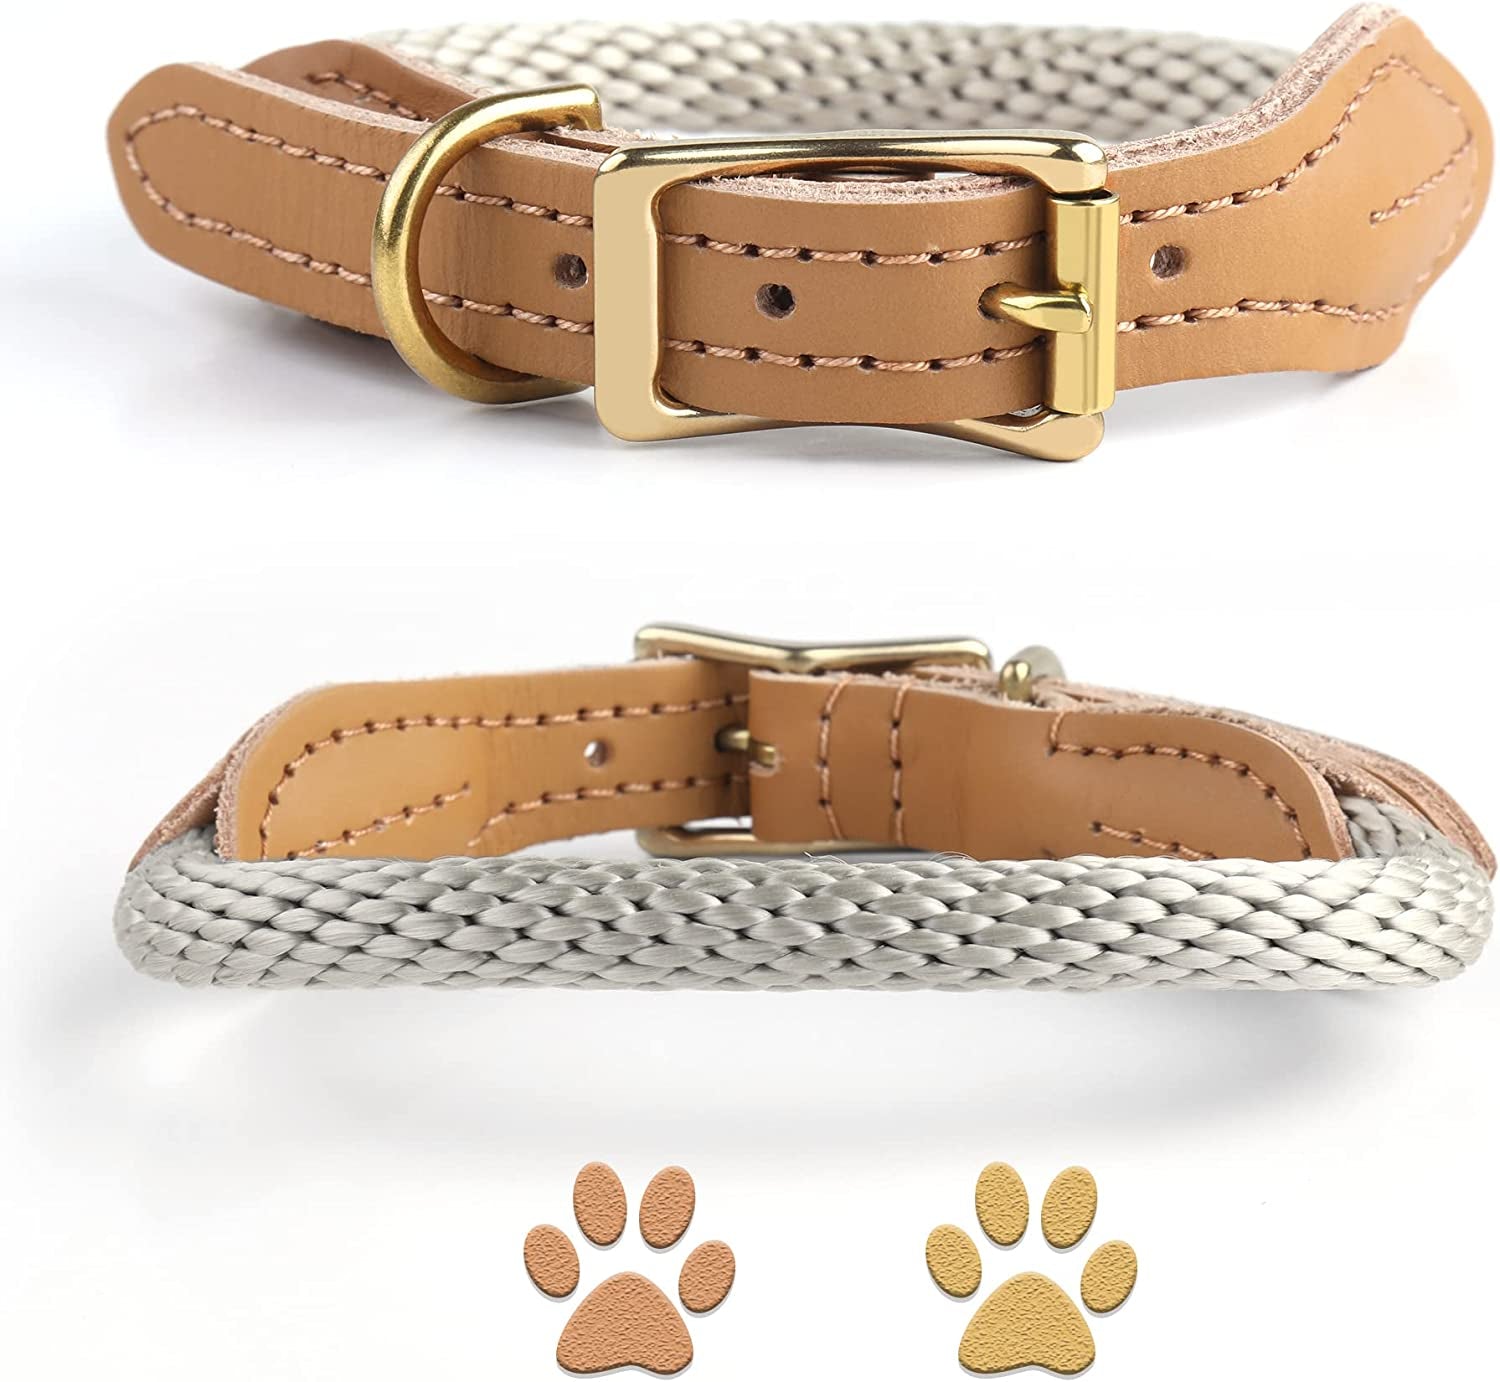 Decorbea Airtag Holder- Airtag Dog Collar Holder(2 Pack)- Dog Airtag Holder in Fashionable Design -PU Leather Pet Collar Case for Apple Airtags Electronics > GPS Accessories > GPS Cases Decorbea Light Brown Dog Collars (Pack of 1) Collar(M/L):15.8"-18.9" 